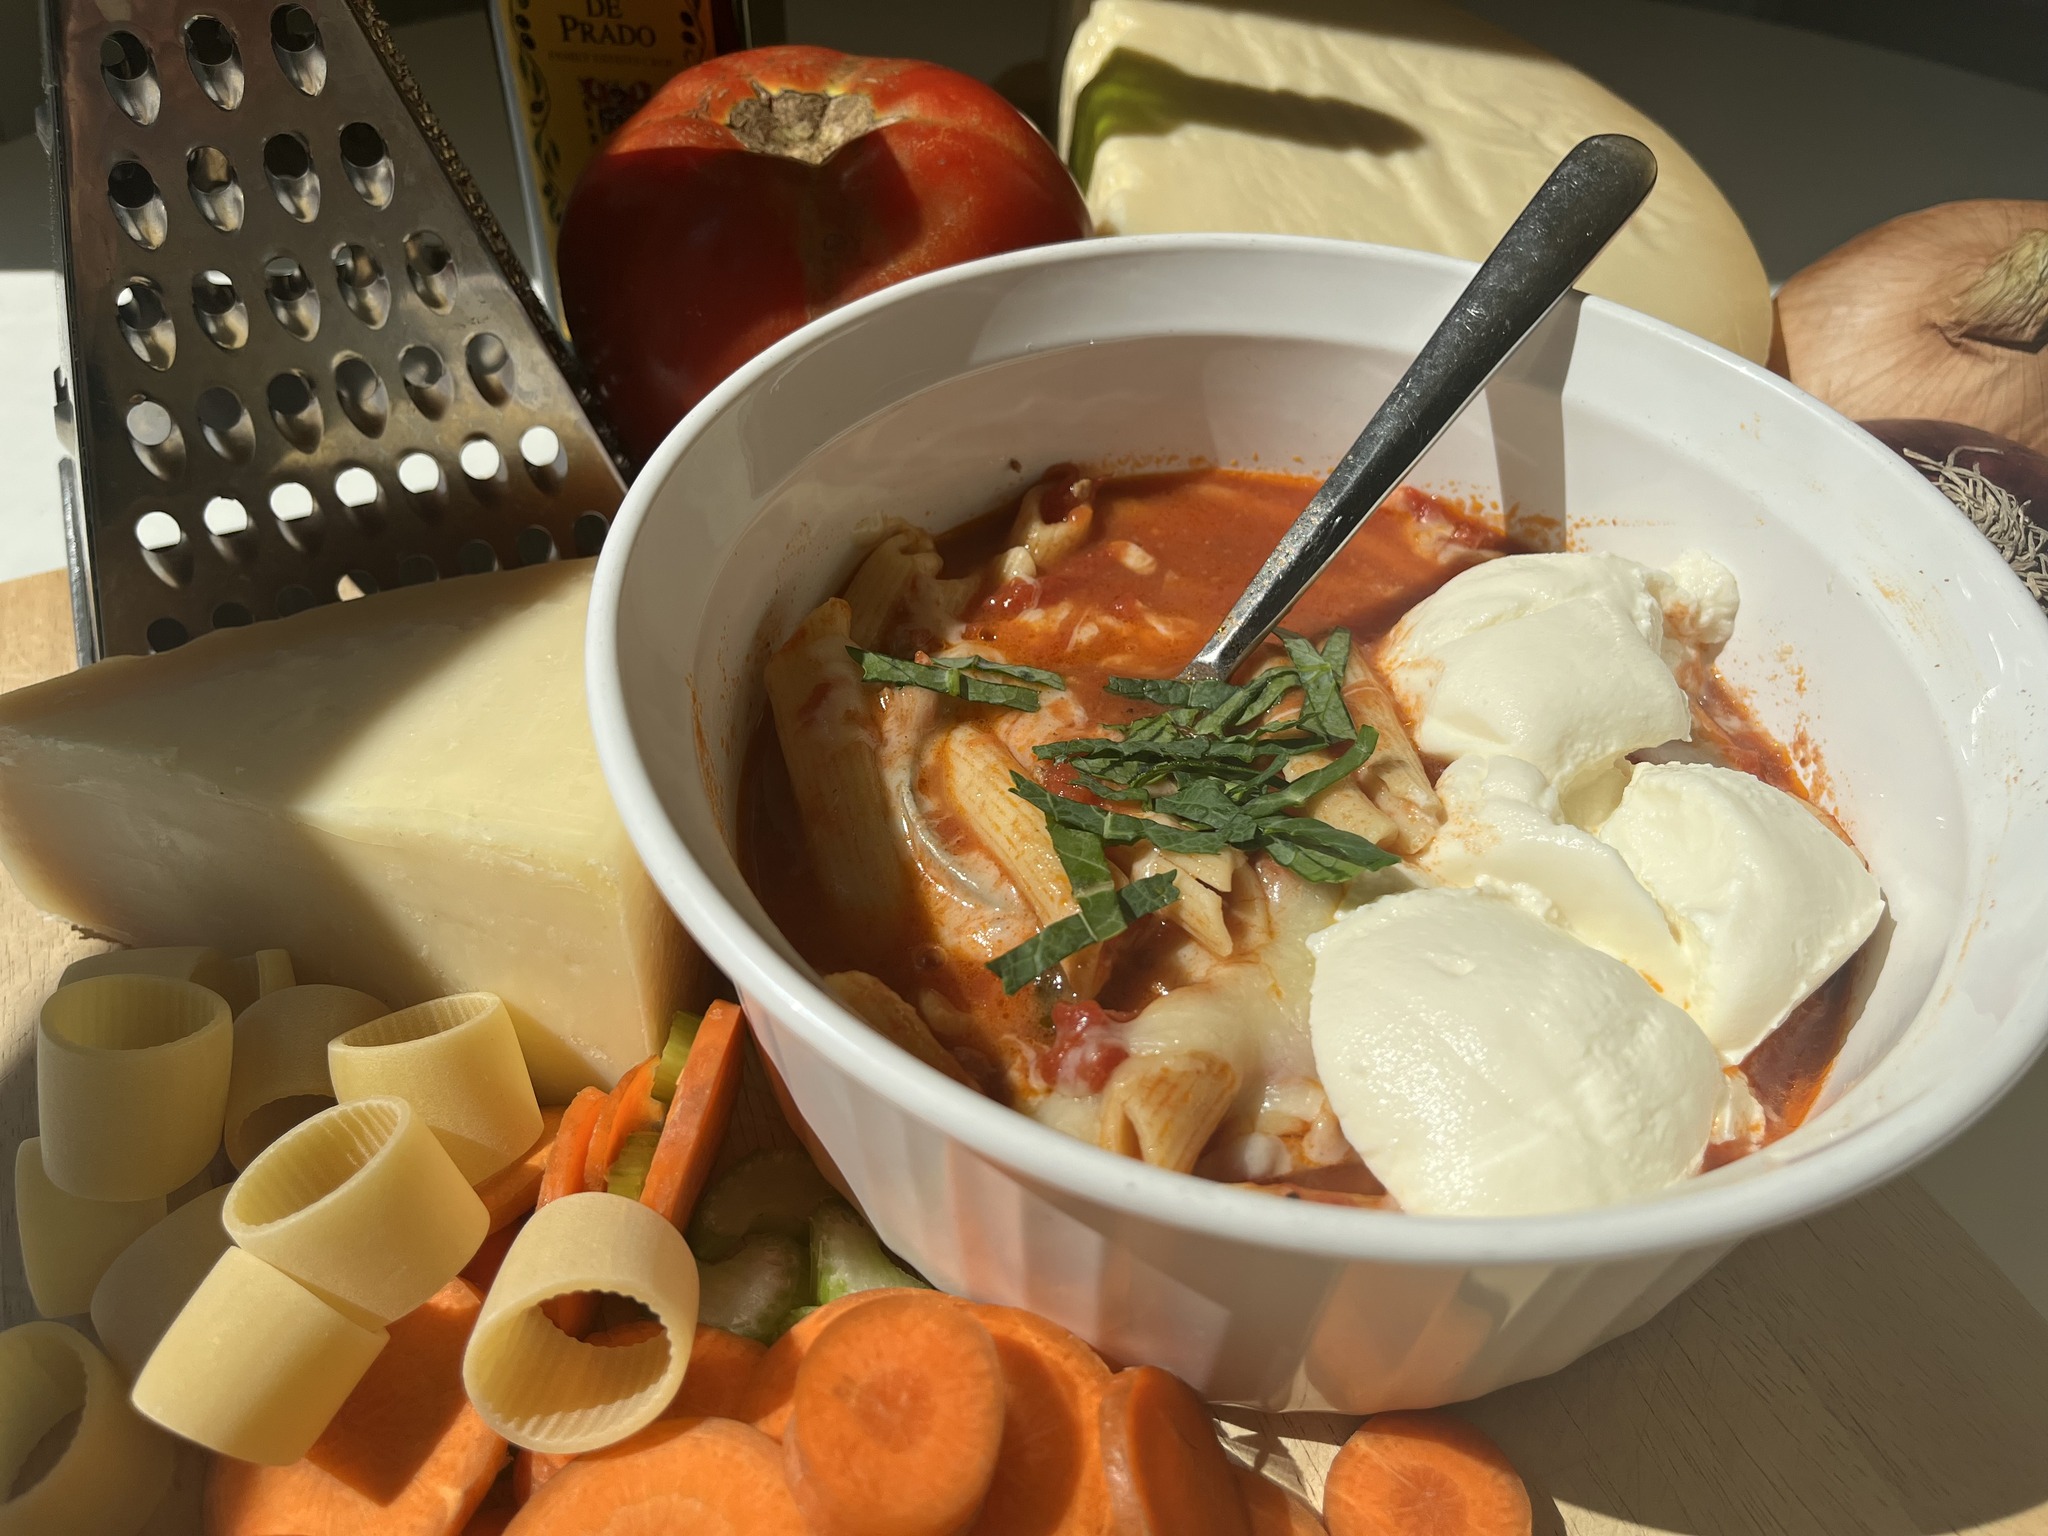 Savor a bowl of fresh tomato soup topped with creamy mozzarella and sprinkled with basil. It's made even better when surrounded by authentic, natural ingredients like rich cheese, crisp vegetables, and hearty pasta.